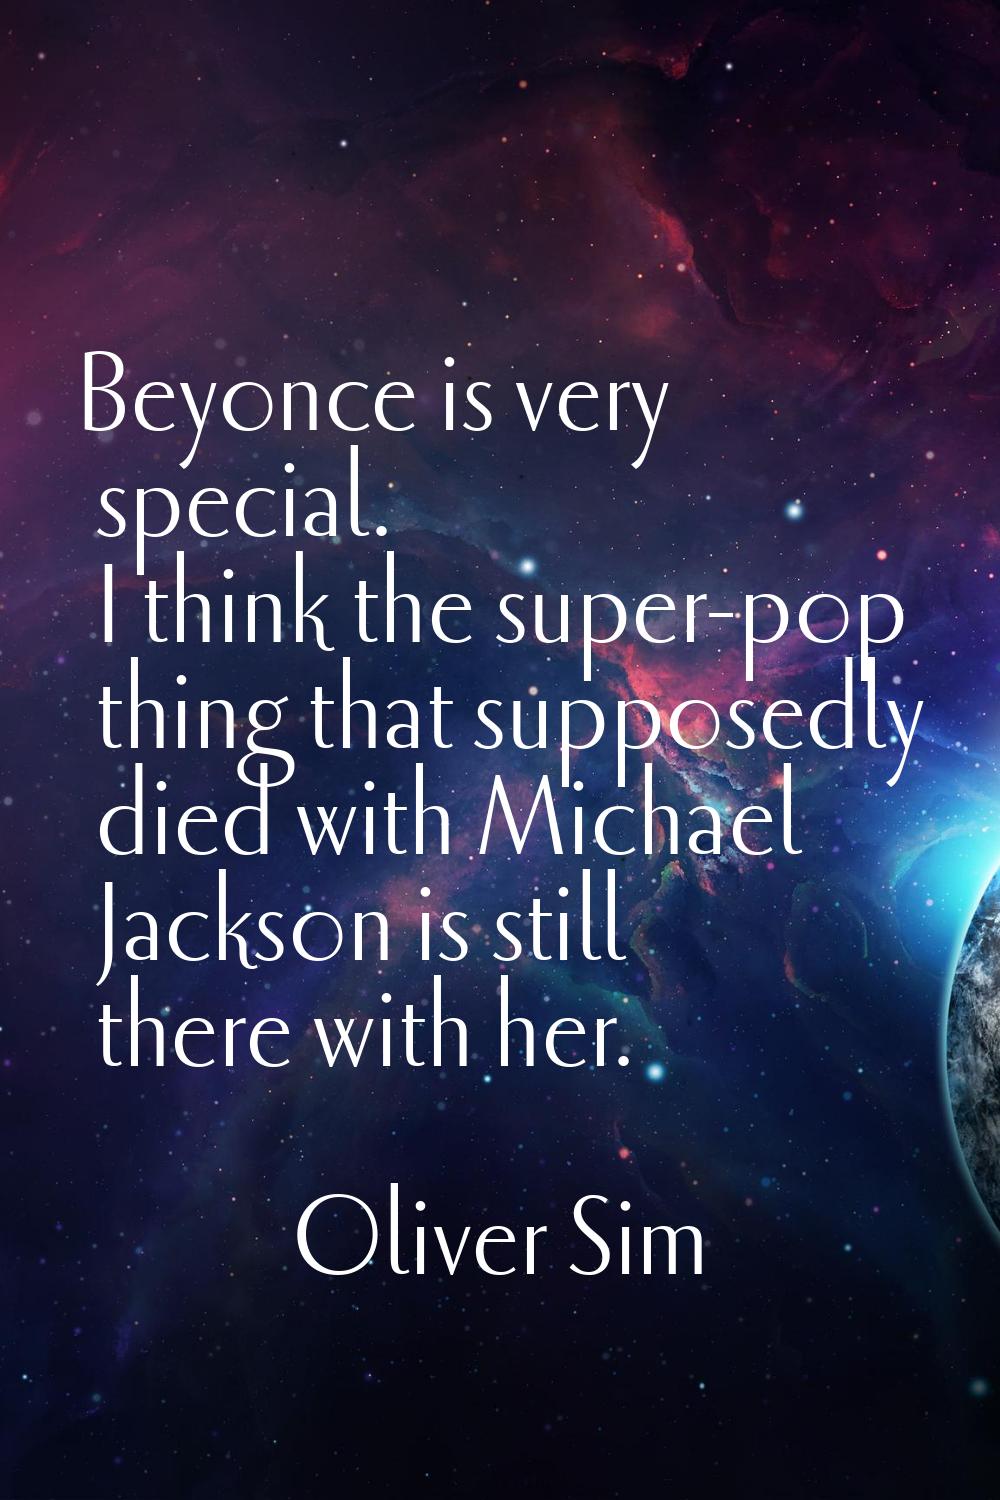 Beyonce is very special. I think the super-pop thing that supposedly died with Michael Jackson is s